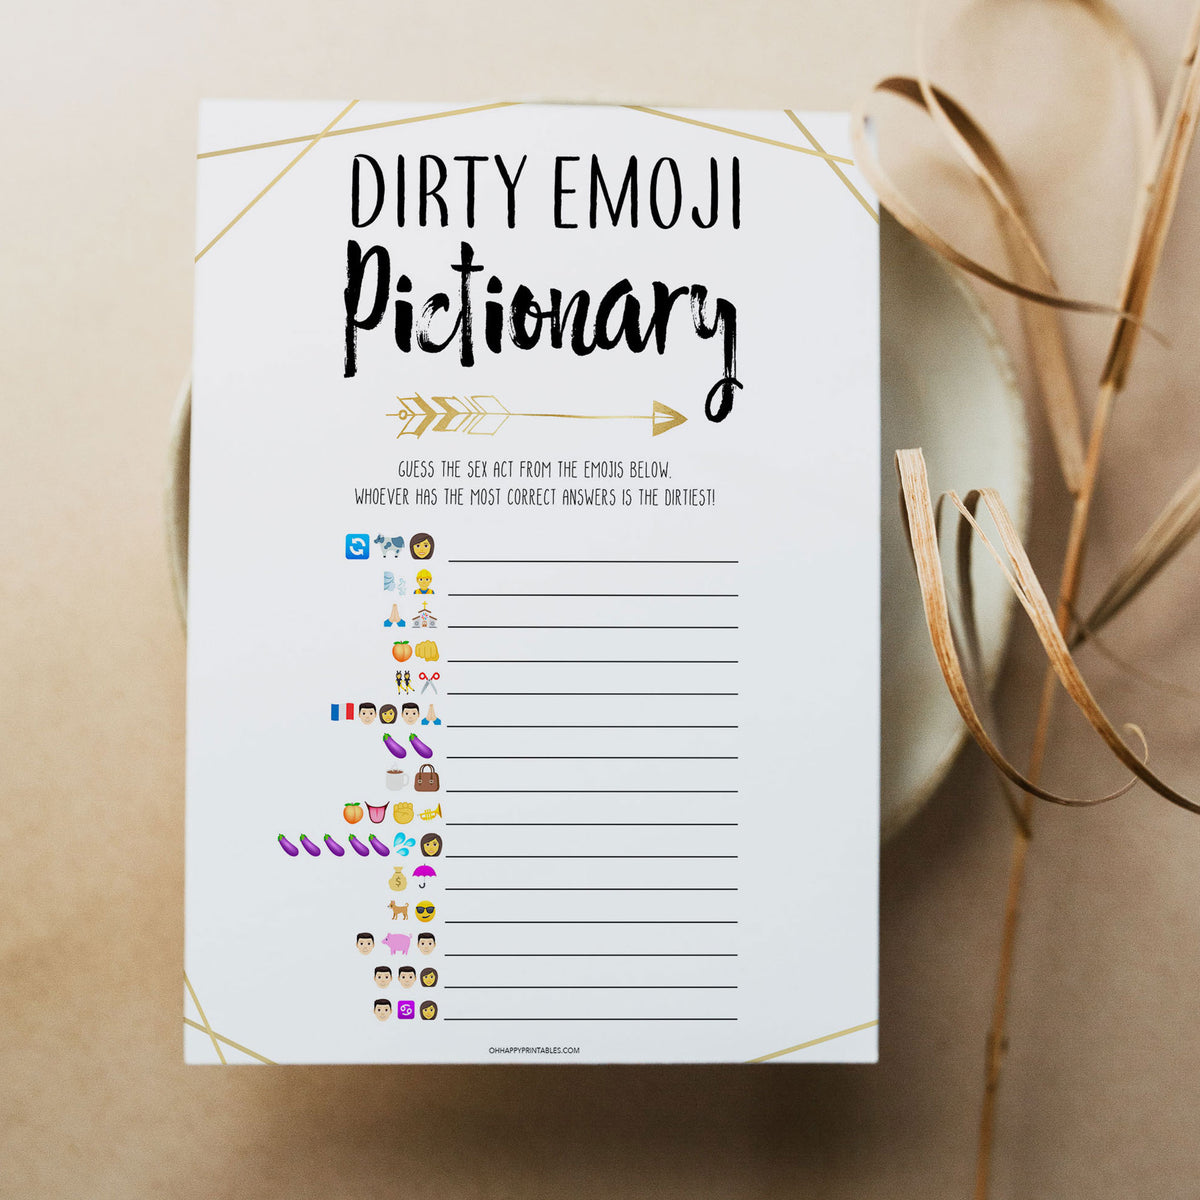 dirty emoji pictionary game, bride tribe bridal shower games, printable bridal shower games, bachelorette party games